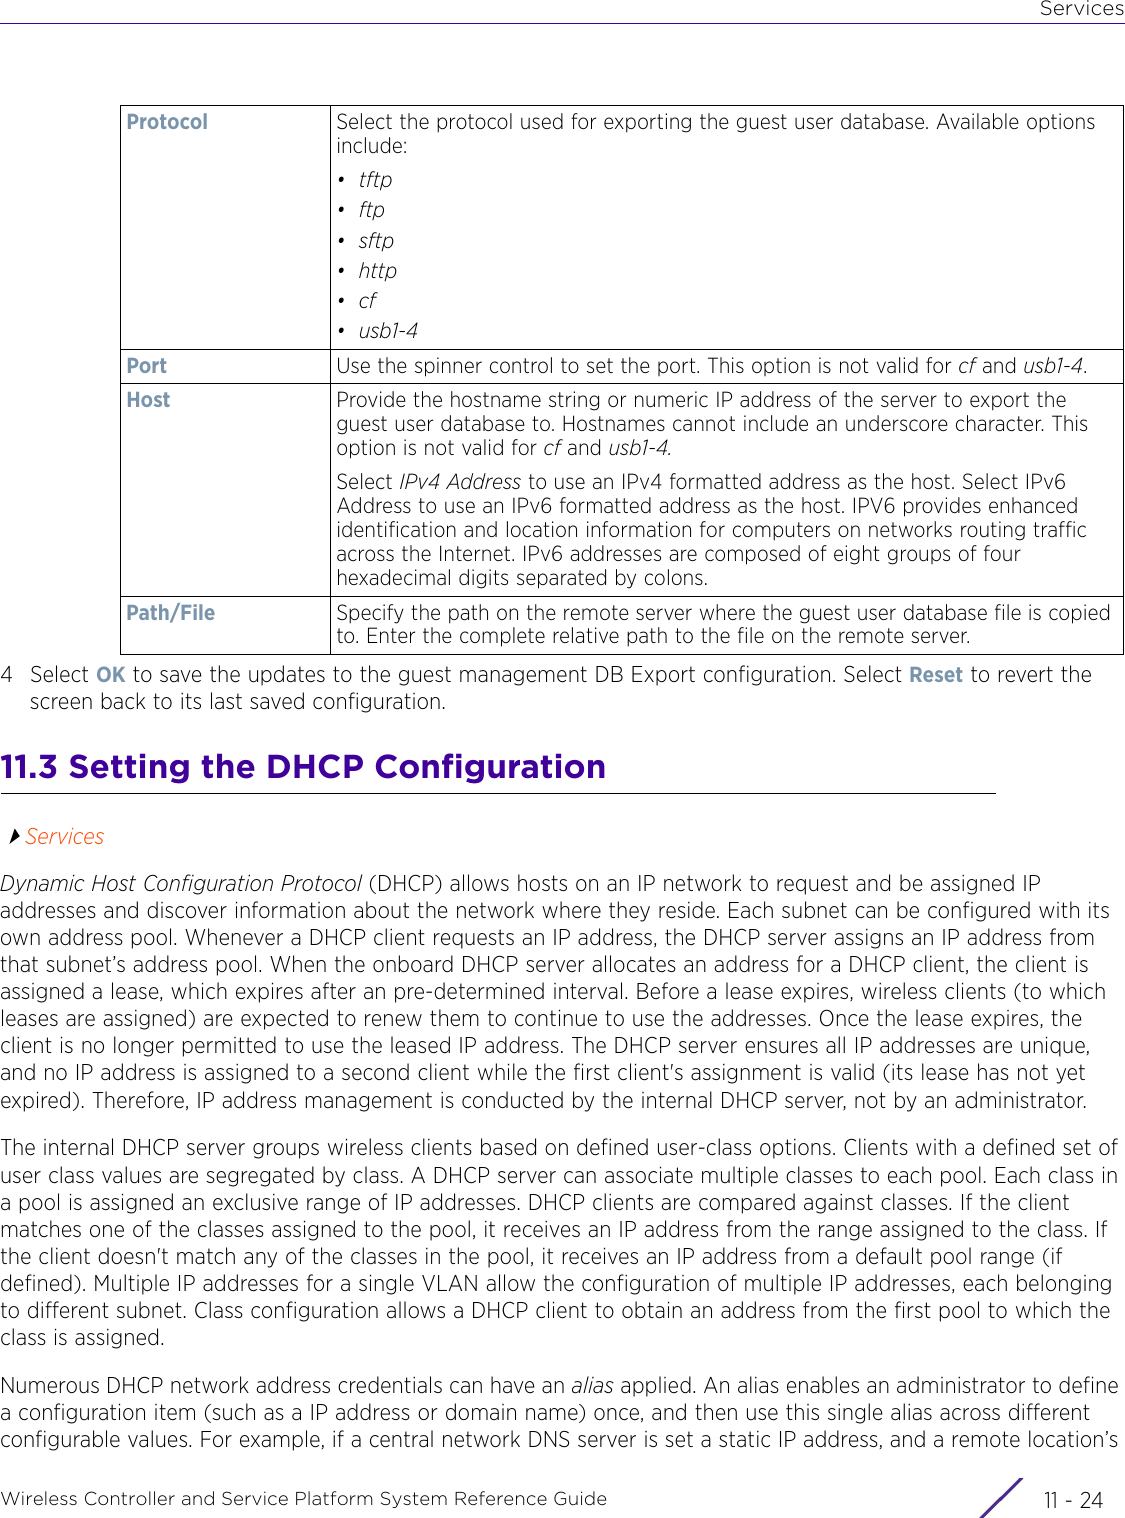 ServicesWireless Controller and Service Platform System Reference Guide  11 - 244Select OK to save the updates to the guest management DB Export configuration. Select Reset to revert the screen back to its last saved configuration.11.3 Setting the DHCP ConfigurationServicesDynamic Host Configuration Protocol (DHCP) allows hosts on an IP network to request and be assigned IP addresses and discover information about the network where they reside. Each subnet can be configured with its own address pool. Whenever a DHCP client requests an IP address, the DHCP server assigns an IP address from that subnet’s address pool. When the onboard DHCP server allocates an address for a DHCP client, the client is assigned a lease, which expires after an pre-determined interval. Before a lease expires, wireless clients (to which leases are assigned) are expected to renew them to continue to use the addresses. Once the lease expires, the client is no longer permitted to use the leased IP address. The DHCP server ensures all IP addresses are unique, and no IP address is assigned to a second client while the first client&apos;s assignment is valid (its lease has not yet expired). Therefore, IP address management is conducted by the internal DHCP server, not by an administrator.The internal DHCP server groups wireless clients based on defined user-class options. Clients with a defined set of user class values are segregated by class. A DHCP server can associate multiple classes to each pool. Each class in a pool is assigned an exclusive range of IP addresses. DHCP clients are compared against classes. If the client matches one of the classes assigned to the pool, it receives an IP address from the range assigned to the class. If the client doesn&apos;t match any of the classes in the pool, it receives an IP address from a default pool range (if defined). Multiple IP addresses for a single VLAN allow the configuration of multiple IP addresses, each belonging to different subnet. Class configuration allows a DHCP client to obtain an address from the first pool to which the class is assigned.Numerous DHCP network address credentials can have an alias applied. An alias enables an administrator to define a configuration item (such as a IP address or domain name) once, and then use this single alias across different configurable values. For example, if a central network DNS server is set a static IP address, and a remote location’s Protocol Select the protocol used for exporting the guest user database. Available options include:•tftp•ftp•sftp•http•cf•usb1-4Port Use the spinner control to set the port. This option is not valid for cf and usb1-4.Host Provide the hostname string or numeric IP address of the server to export the guest user database to. Hostnames cannot include an underscore character. This option is not valid for cf and usb1-4. Select IPv4 Address to use an IPv4 formatted address as the host. Select IPv6 Address to use an IPv6 formatted address as the host. IPV6 provides enhanced identification and location information for computers on networks routing traffic across the Internet. IPv6 addresses are composed of eight groups of four hexadecimal digits separated by colons.Path/File Specify the path on the remote server where the guest user database file is copied to. Enter the complete relative path to the file on the remote server.